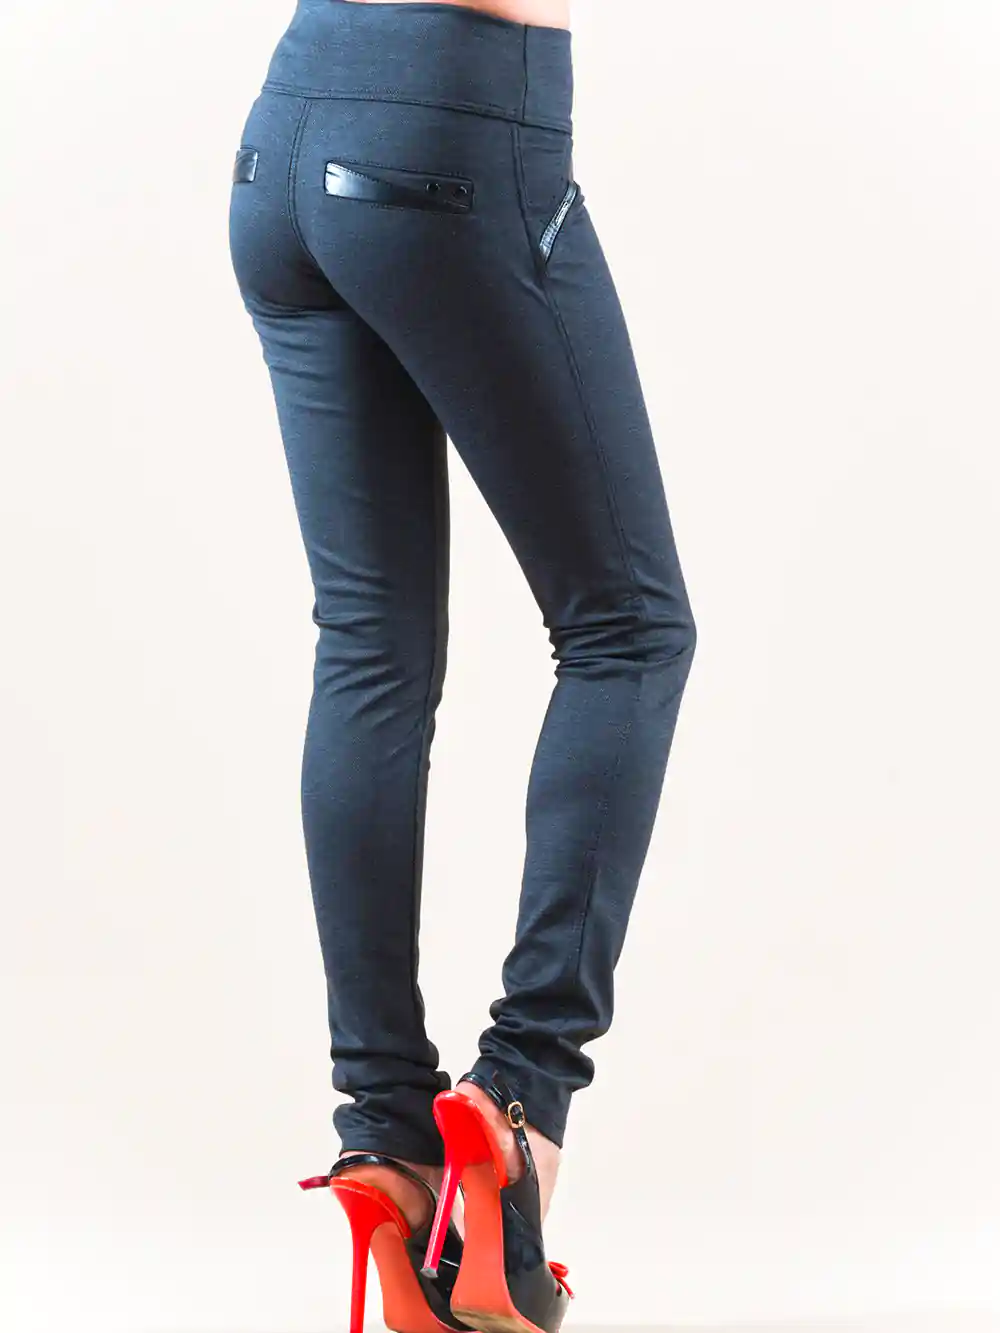 7 struggles that all women who wear tight pants know – SheKnows